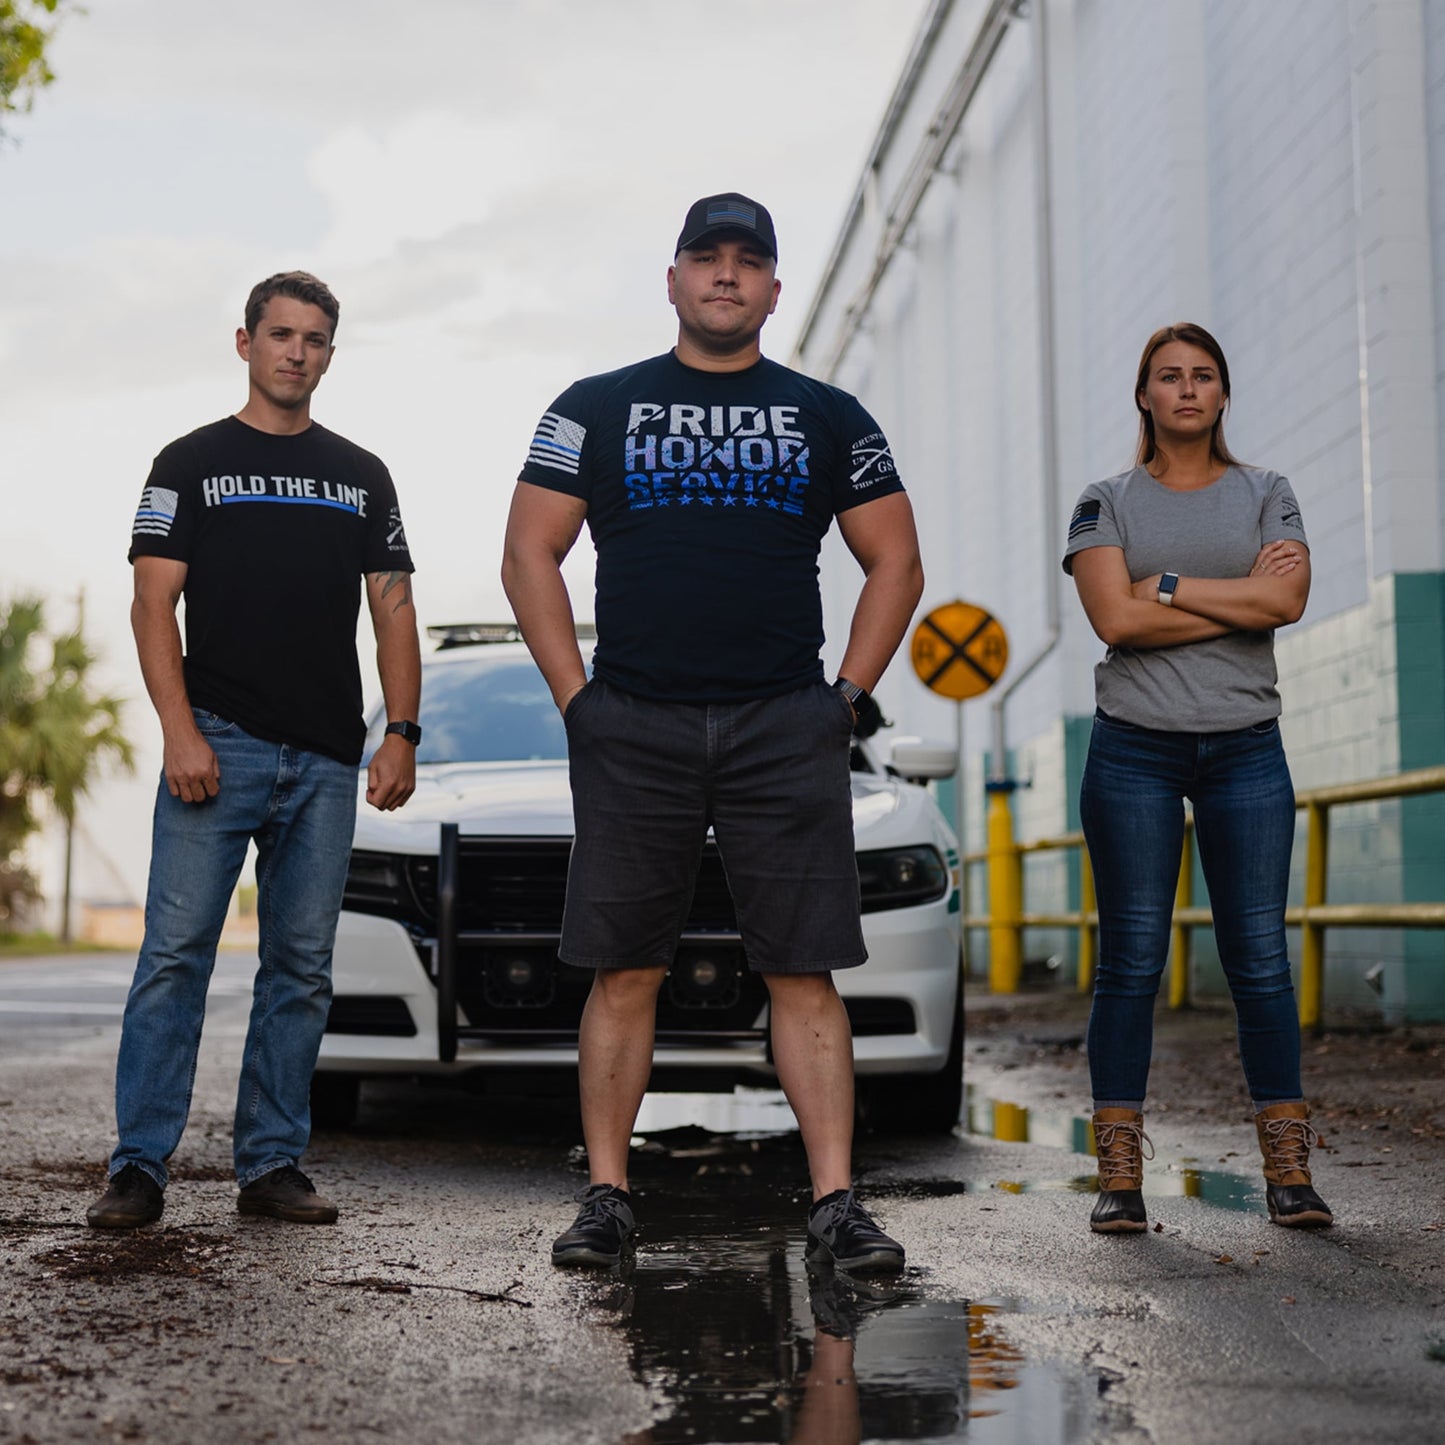 Hold The Line Shirt for Men Police Support | Grunt Style